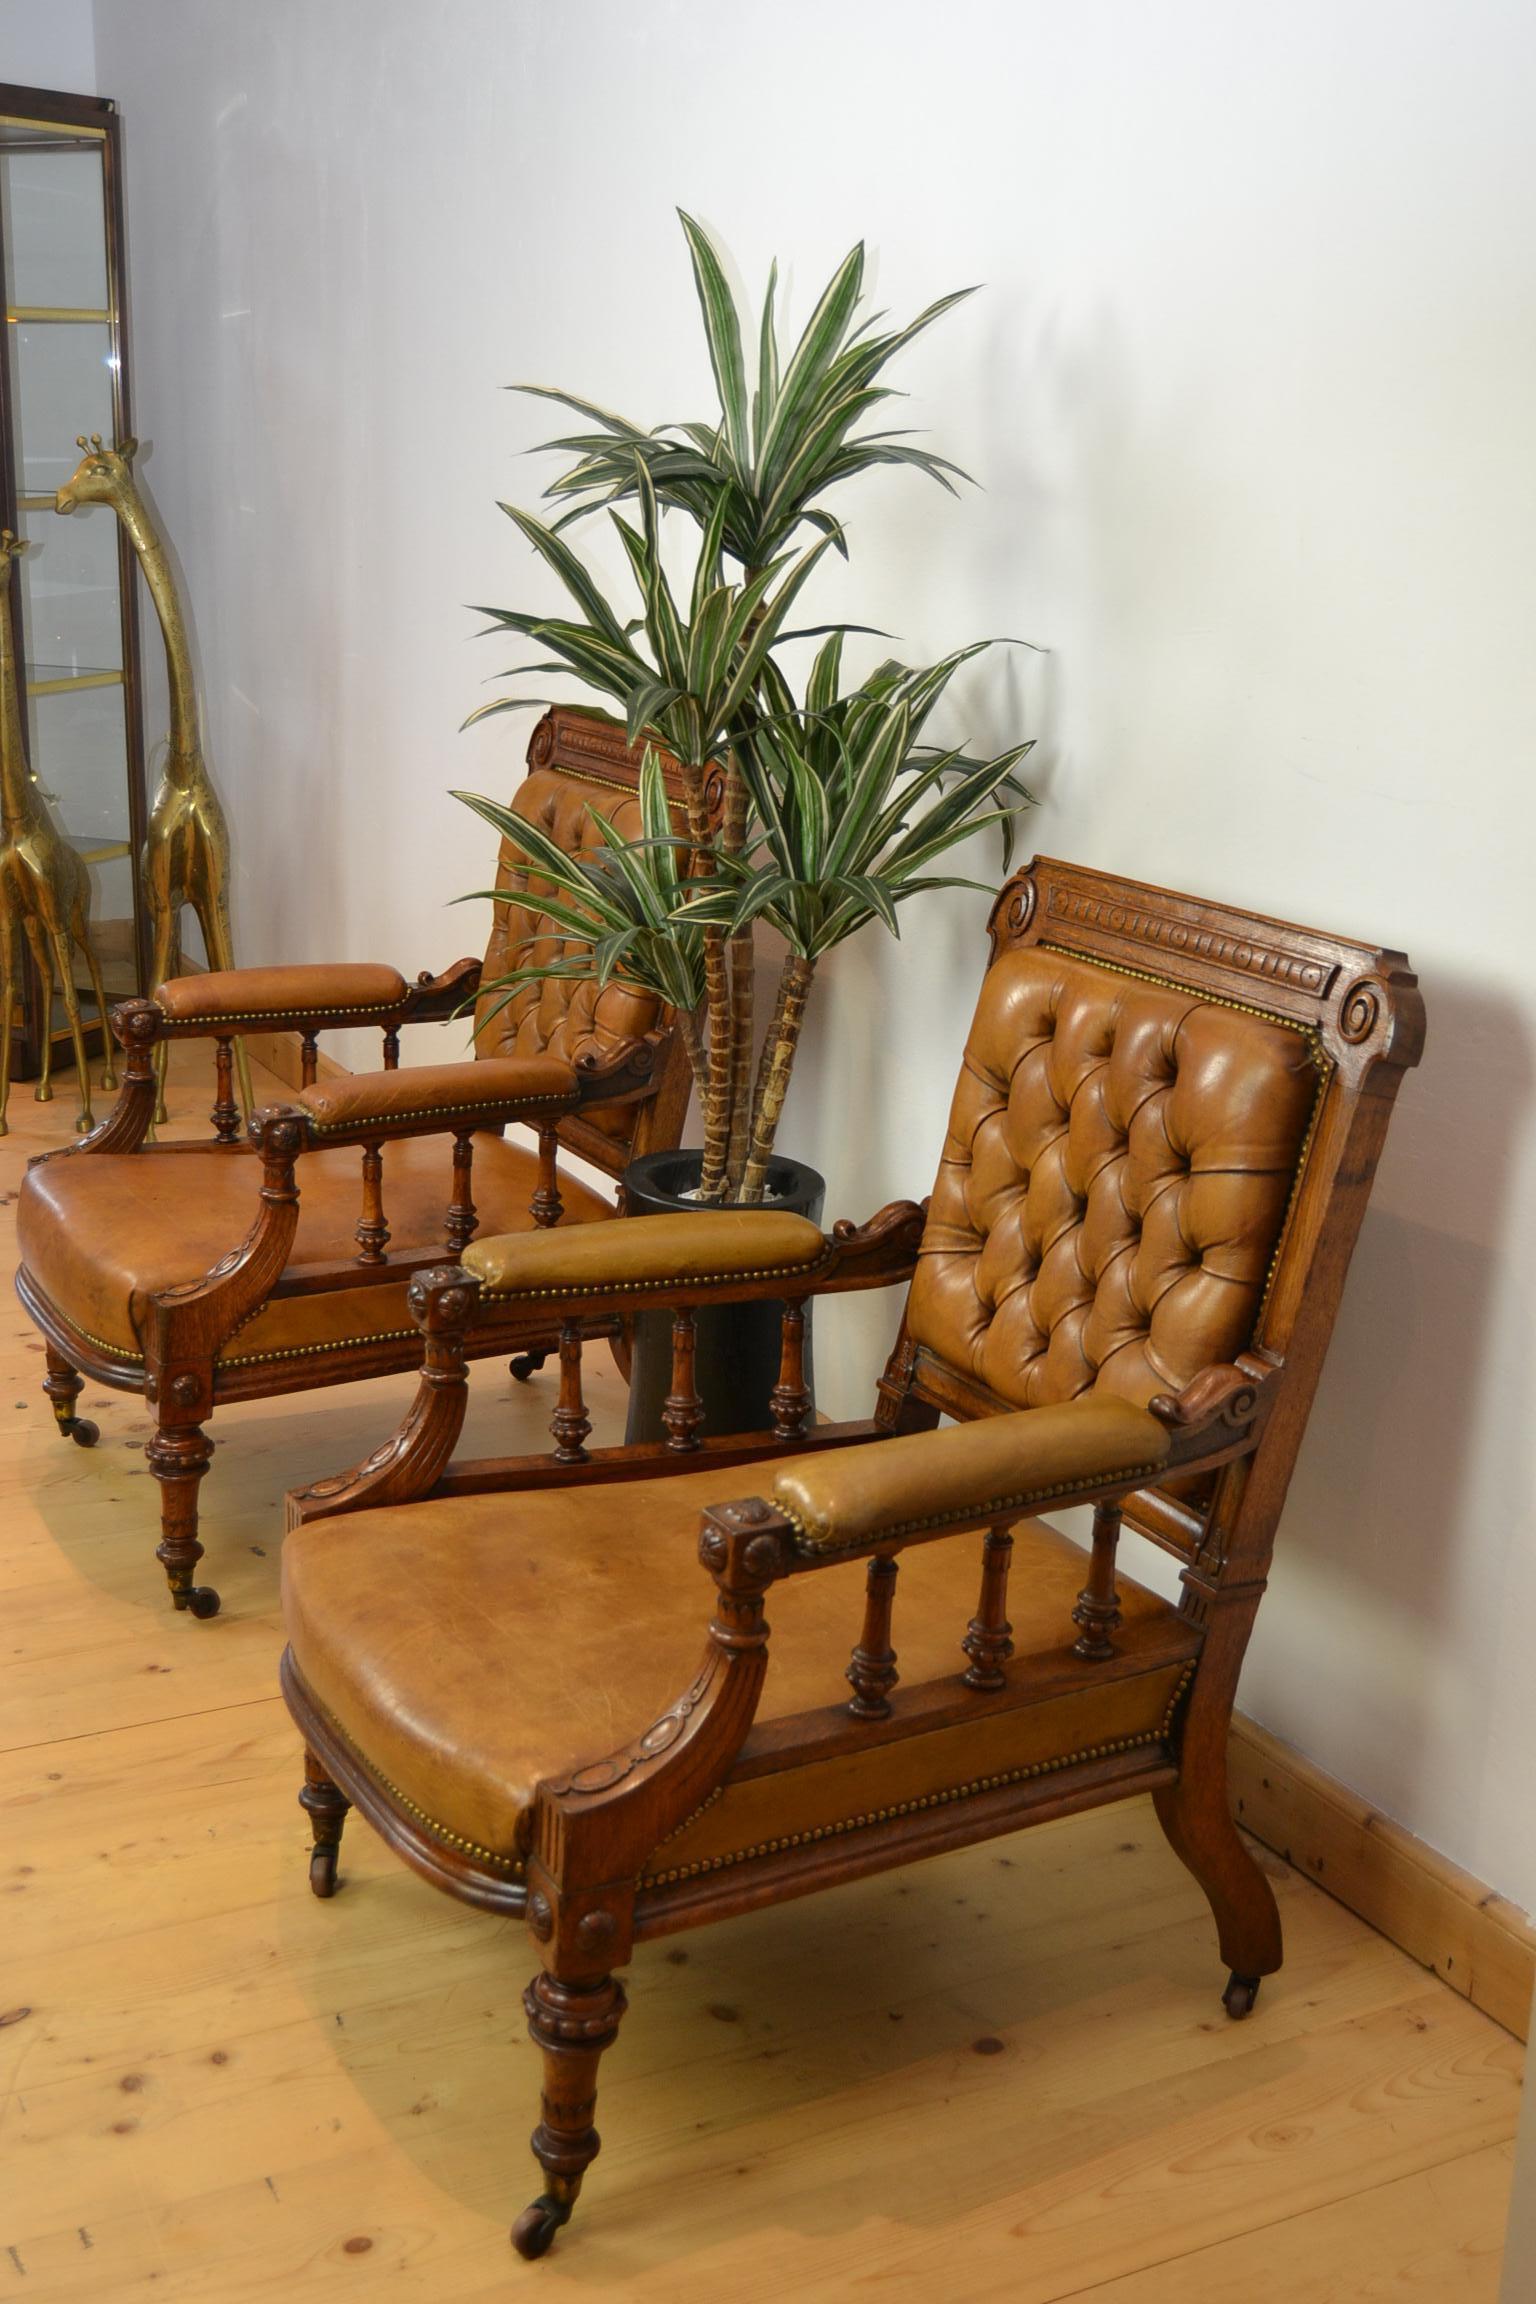 Great looking Antique Library Chairs, Armchairs, Lobby Chairs.
These two Imposing English Chairs with a deep seat , 
date from the late 19th century.
They have a wooden frame and are upholstered in leather.
The back of the chairs have a buttoned